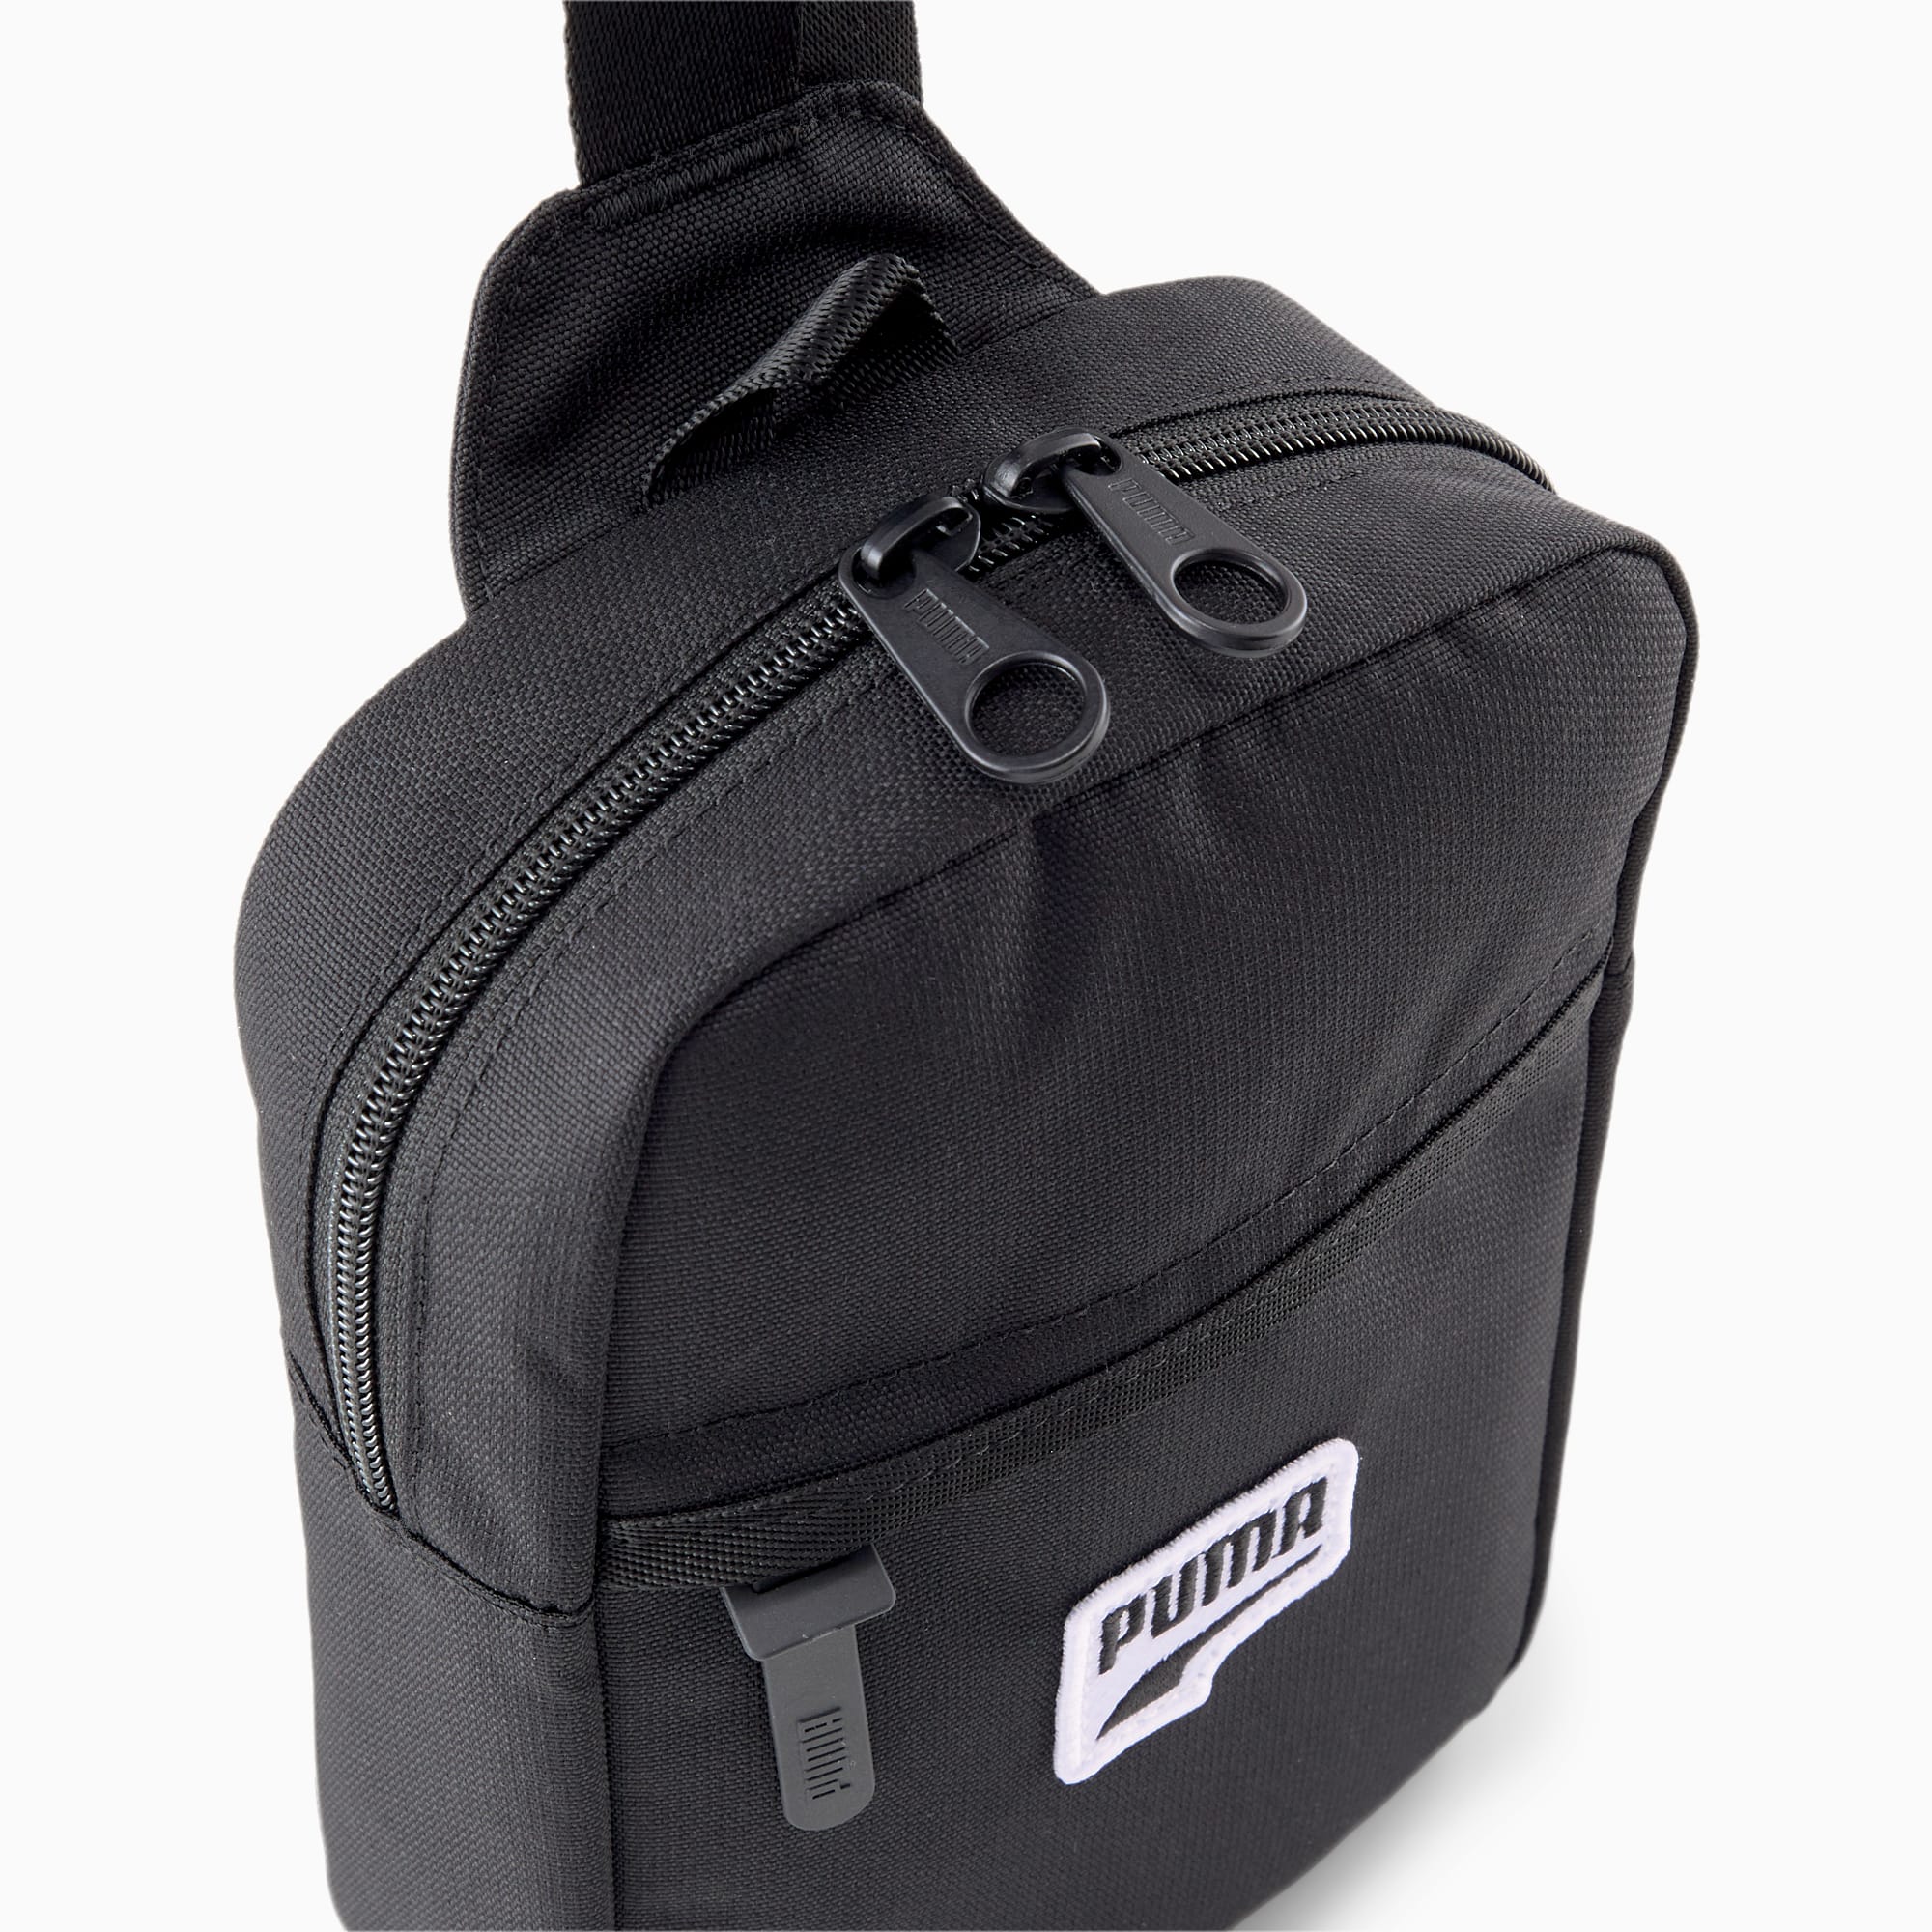 Downtown sling backpack